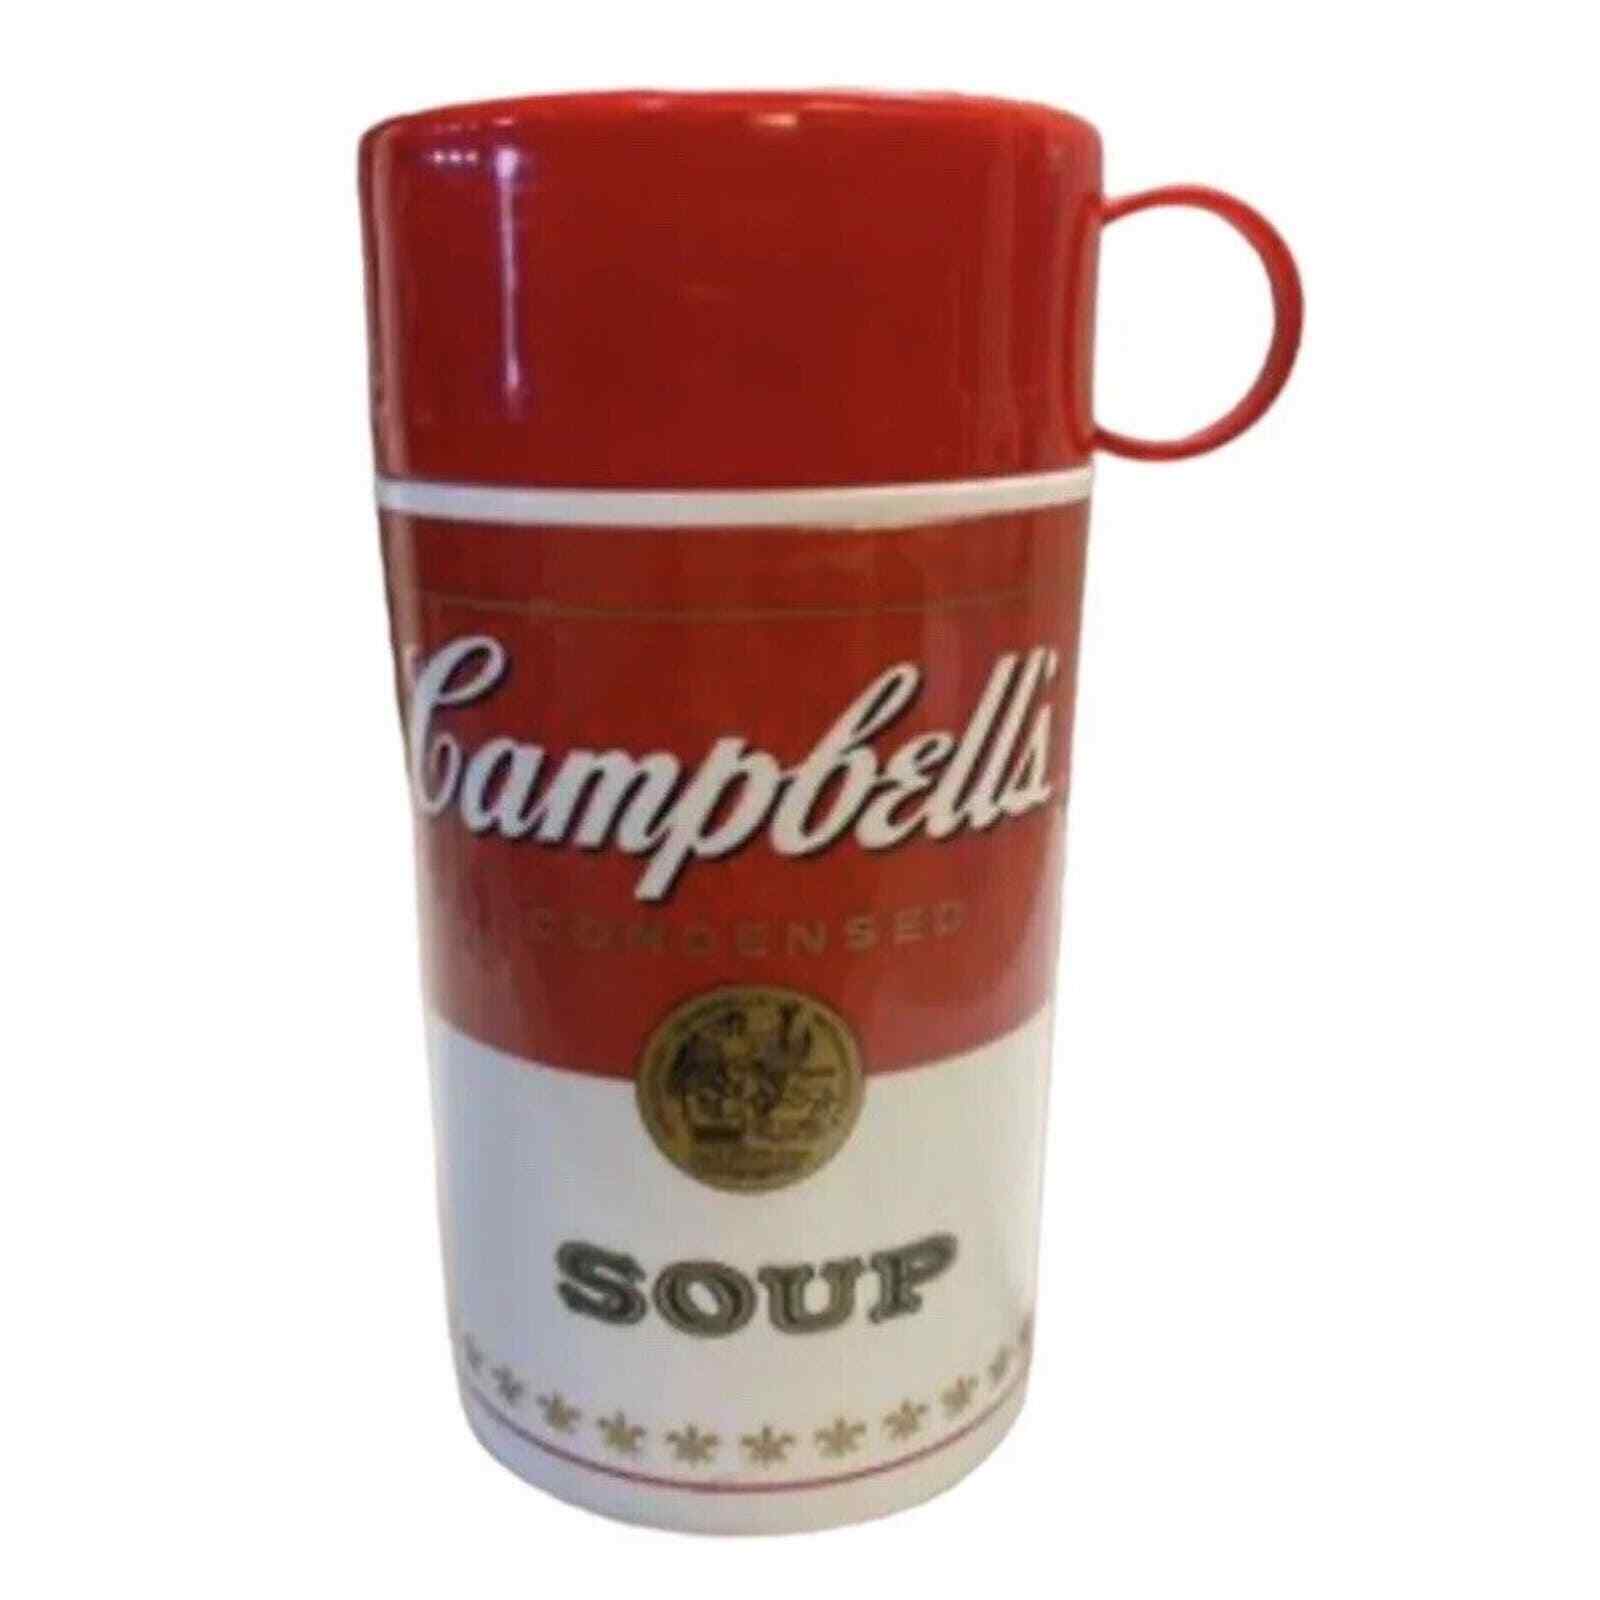 Vintage 1998 Campbell\'s Soup Insulated Thermos Mug Can-Tainer, 11.5 ounce